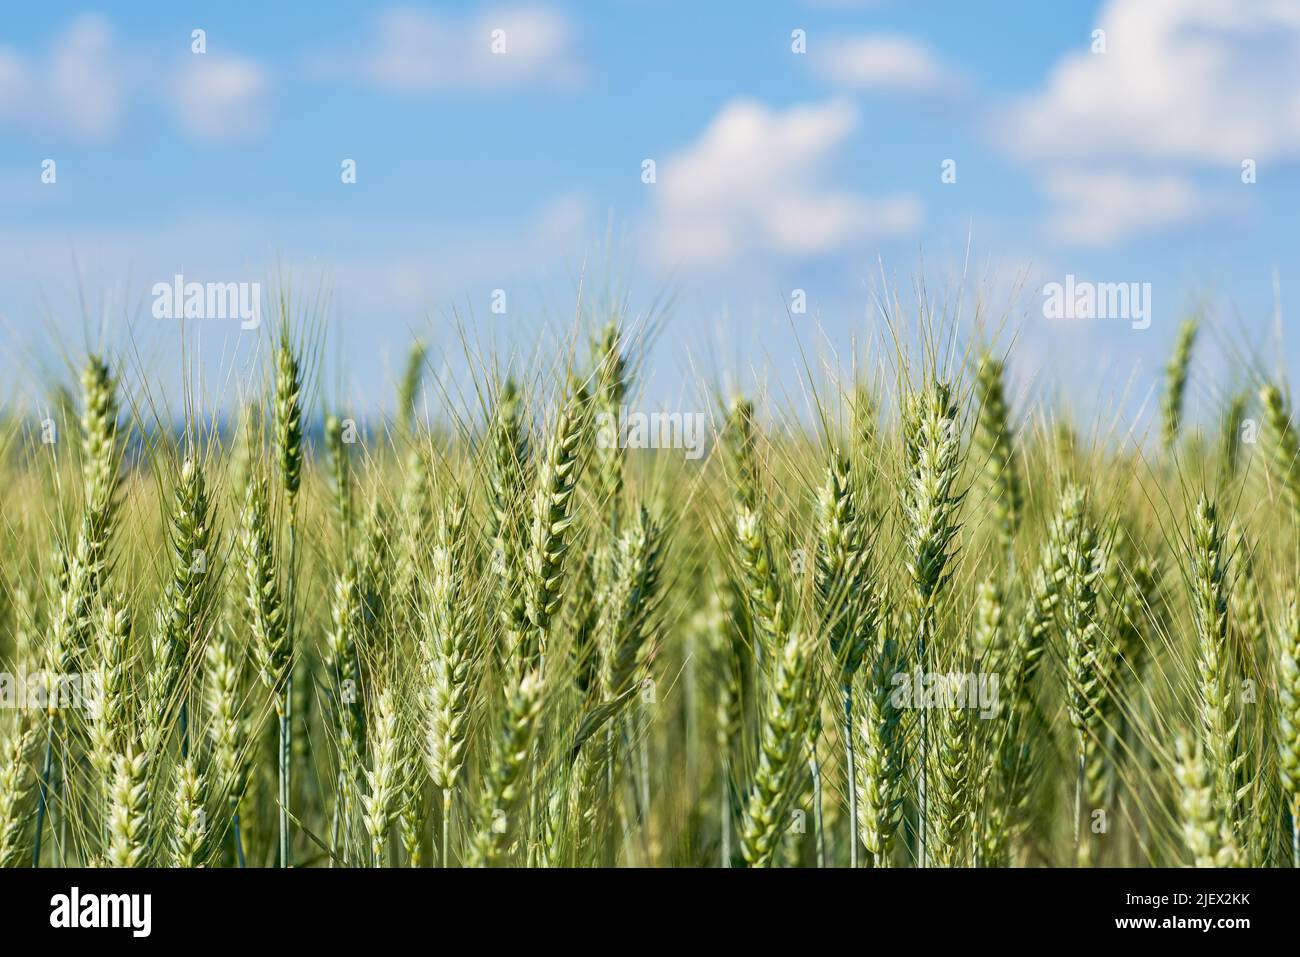 View of a cereal field with wheat ears under a summer blue sky with white clouds. Stock Photo